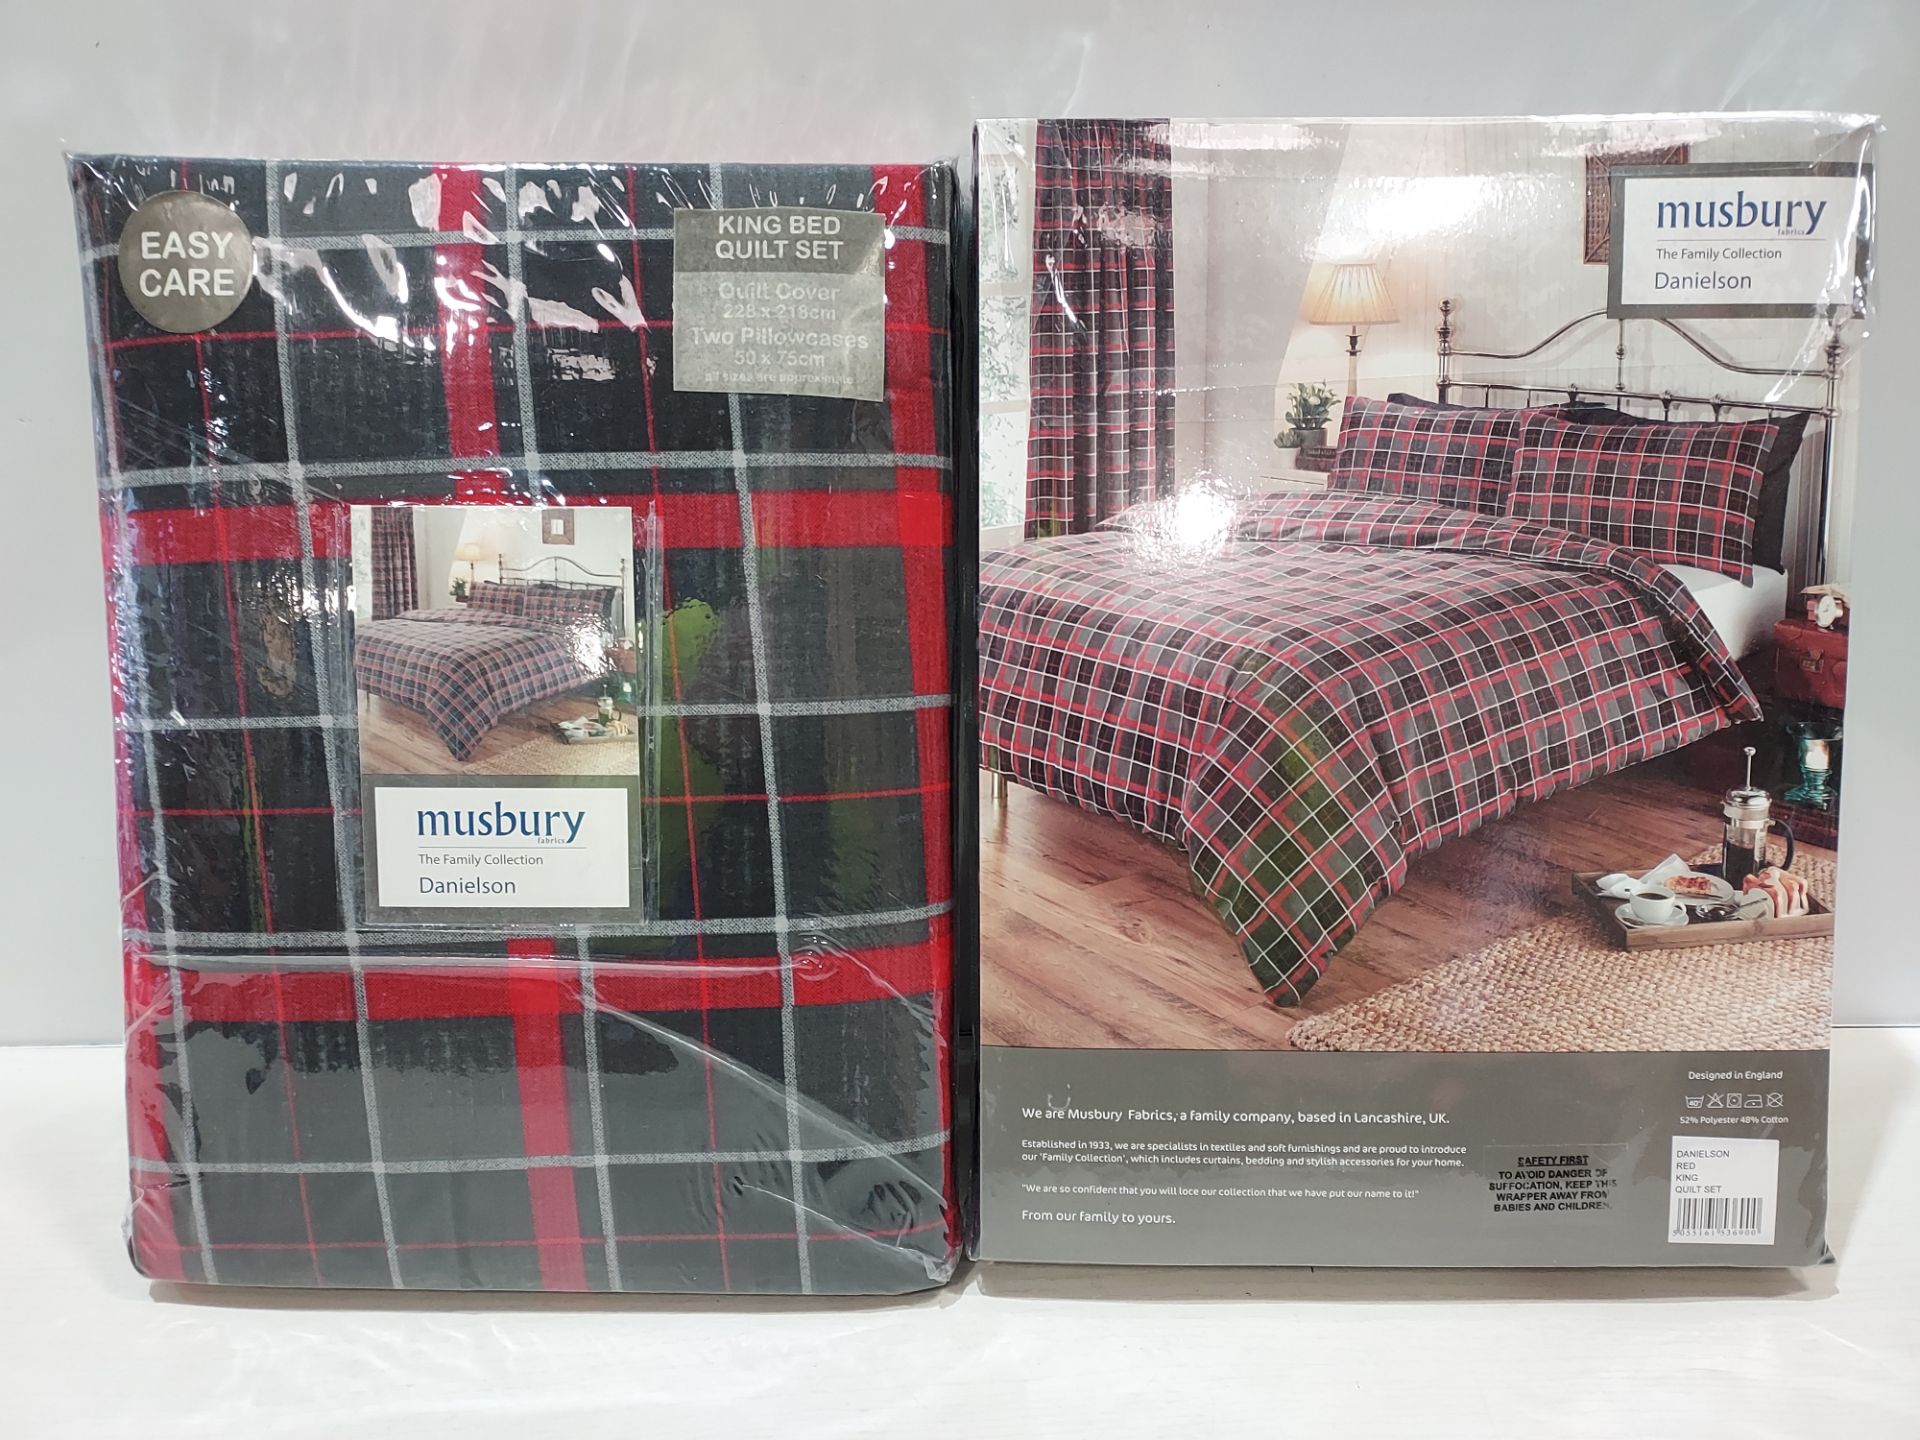 17 X BRAND NEW MUSBURY DANIELSON DUVET SETS TO INCLUDE DUVET COVER AND 2 PILLOW CASES 5 X SUPER KING